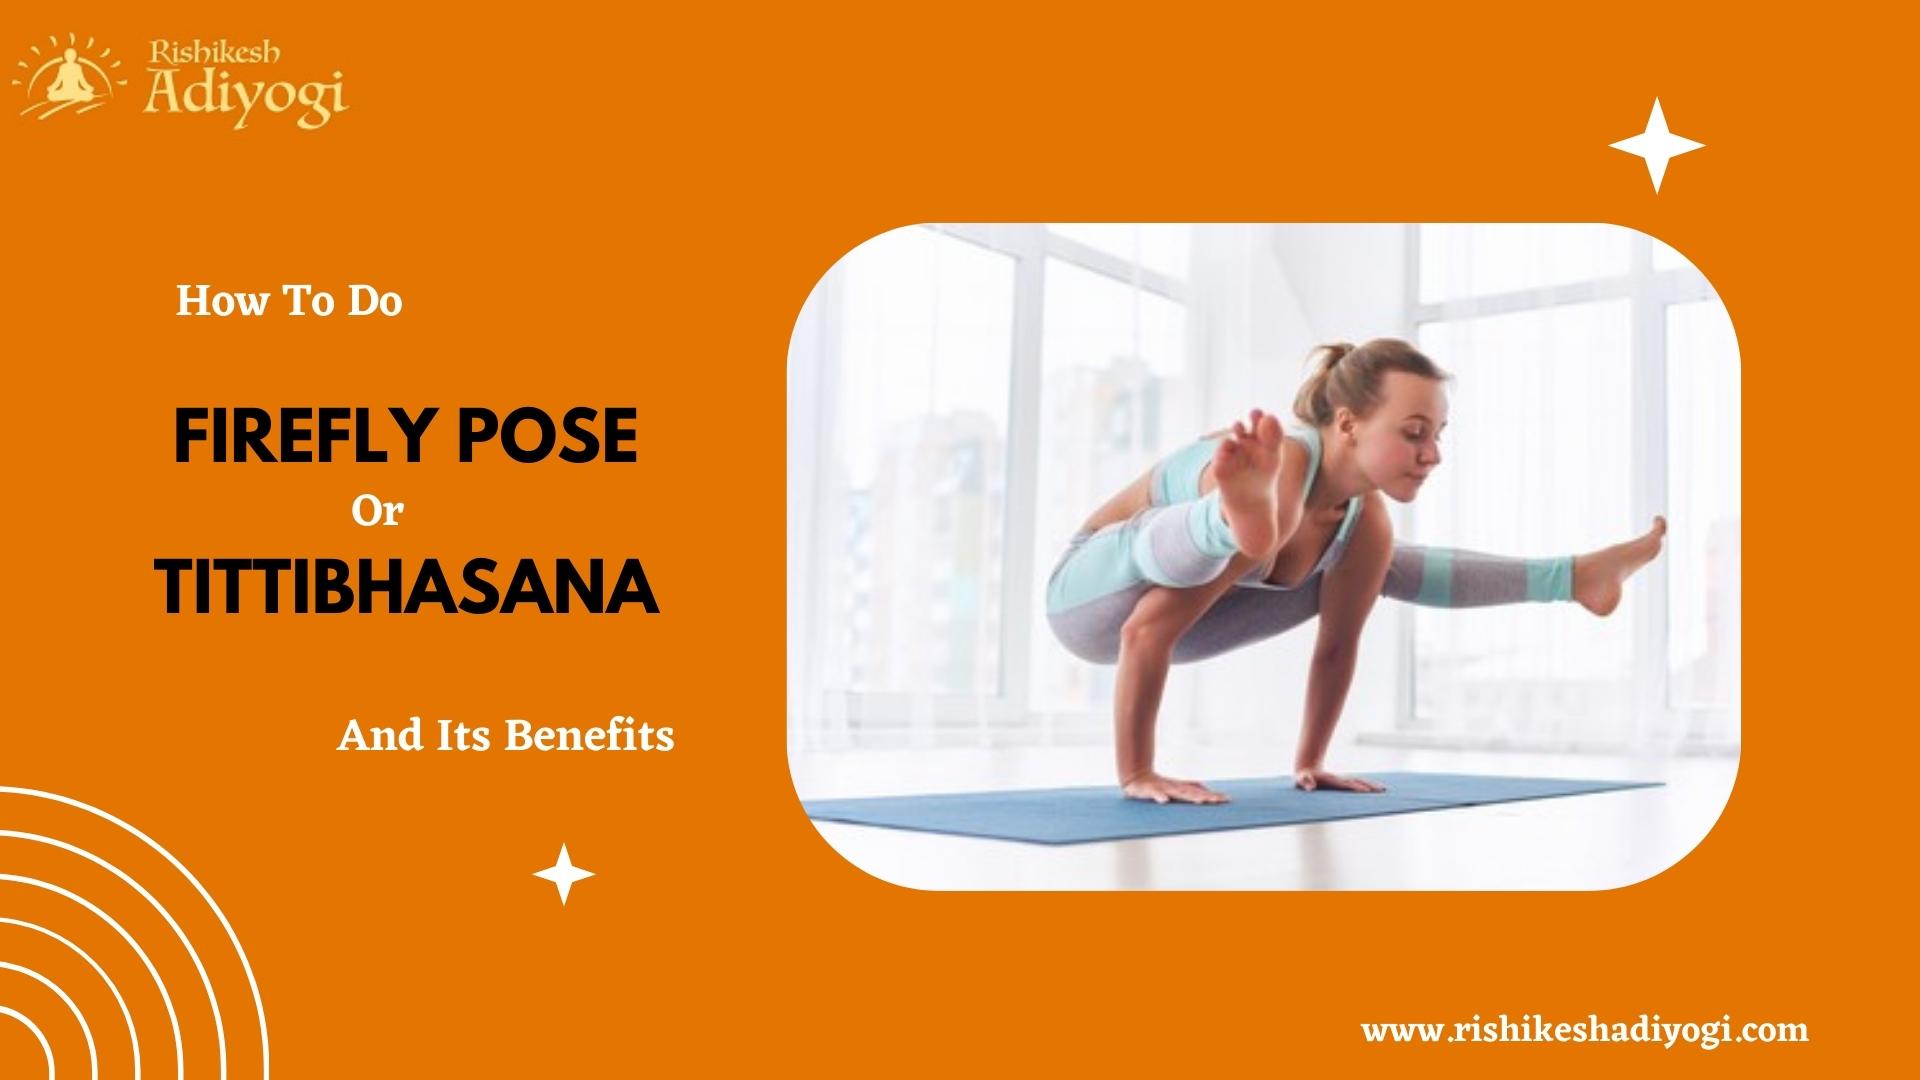 How To Do Firefly Pose Or Tittibhasana And Its Benefits